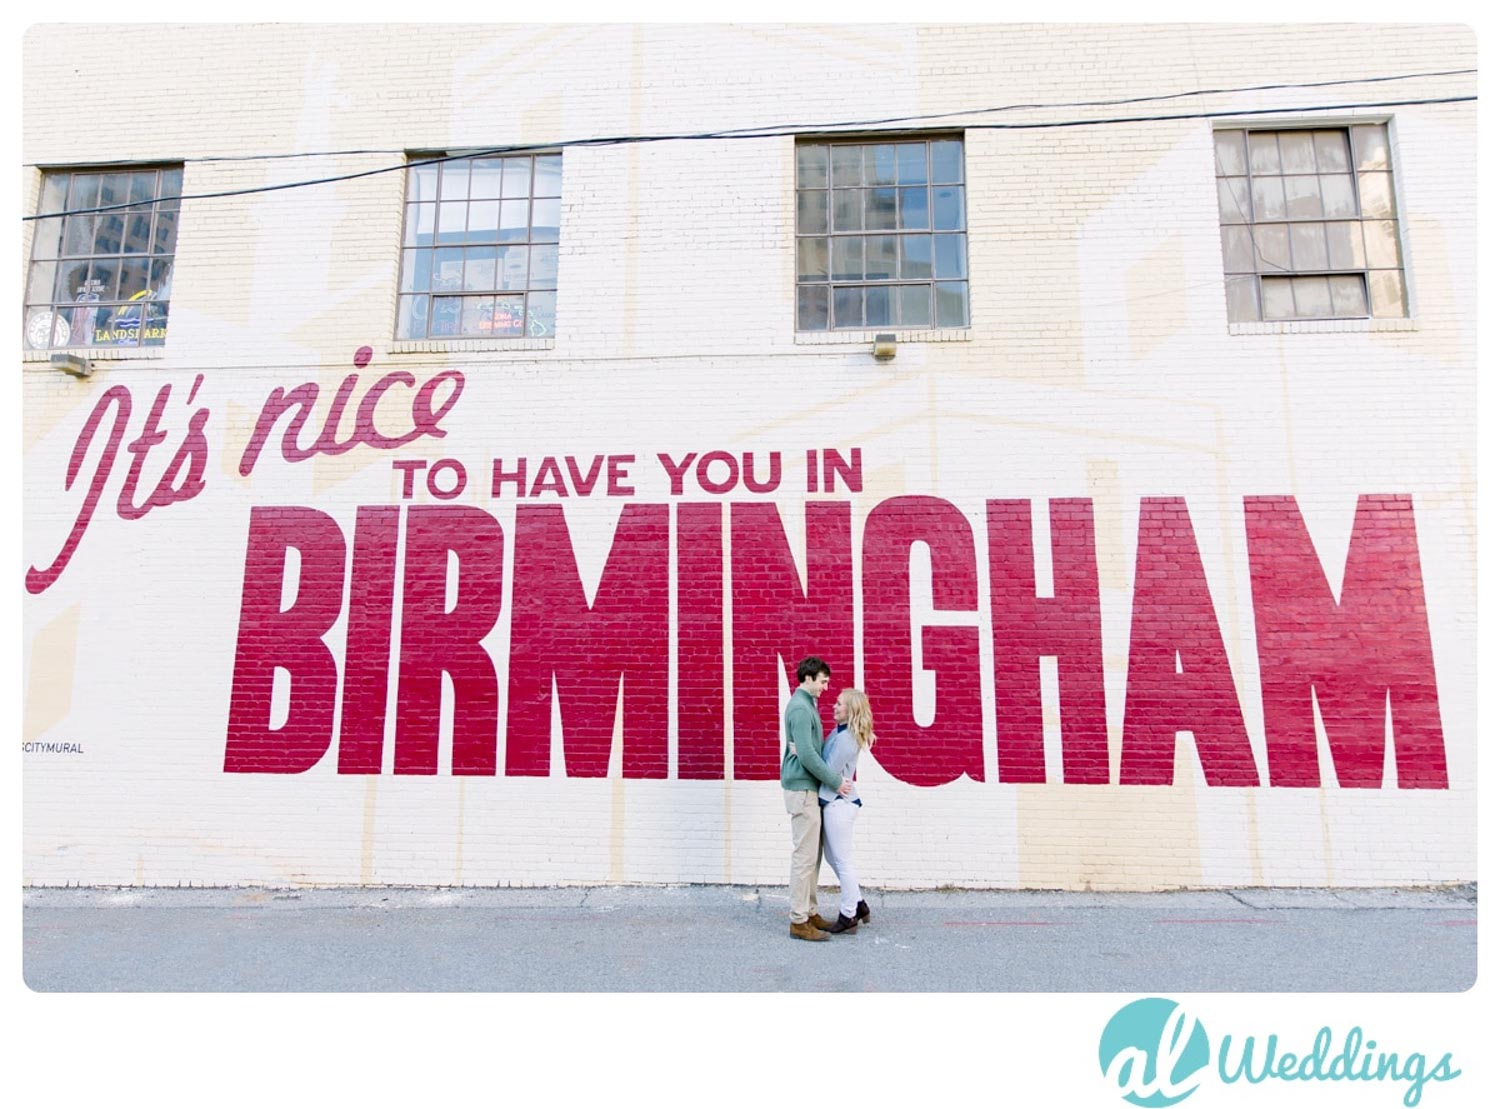 Birmingham,Johns City Murals,downtown,its nice to have you in birmingham,